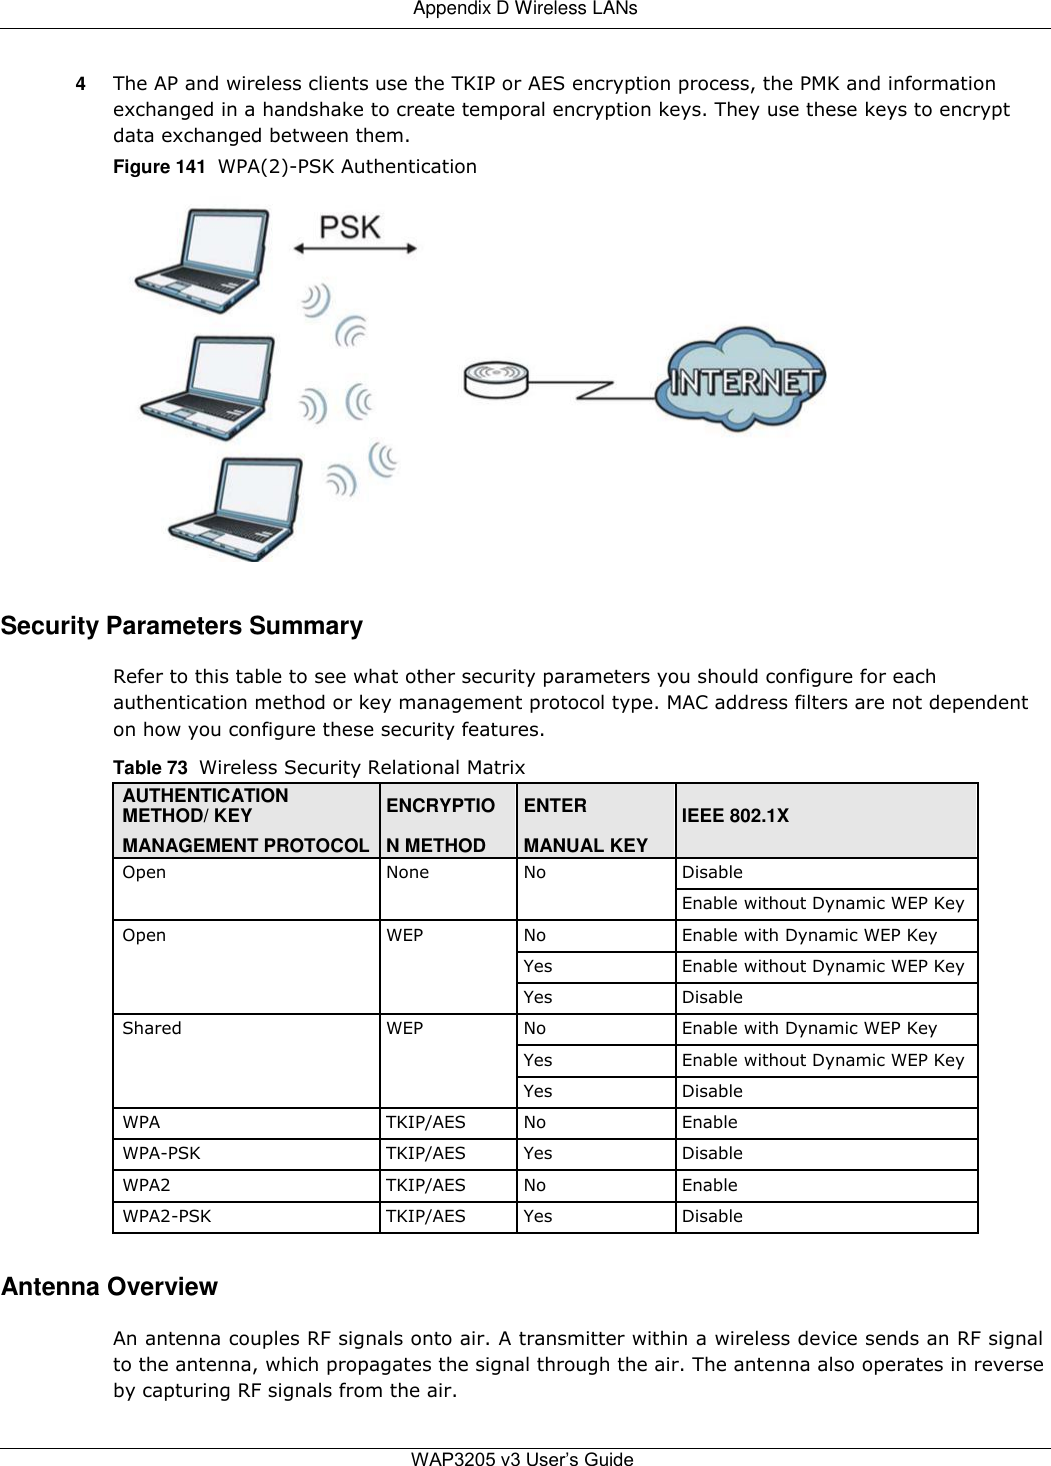  Appendix D Wireless LANs   4  The AP and wireless clients use the TKIP or AES encryption process, the PMK and information exchanged in a handshake to create temporal encryption keys. They use these keys to encrypt data exchanged between them.  Figure 141  WPA(2)-PSK Authentication                     Security Parameters Summary  Refer to this table to see what other security parameters you should configure for each authentication method or key management protocol type. MAC address filters are not dependent on how you configure these security features.  Table 73  Wireless Security Relational Matrix  AUTHENTICATION ENCRYPTIO ENTER   METHOD/ KEY IEEE 802.1X  N METHOD MANUAL KEY  MANAGEMENT PROTOCOL   Open None No Disable          Enable without Dynamic WEP Key       Open WEP No Enable with Dynamic WEP Key         Yes Enable without Dynamic WEP Key         Yes Disable       Shared WEP No Enable with Dynamic WEP Key         Yes Enable without Dynamic WEP Key         Yes Disable       WPA TKIP/AES No Enable       WPA-PSK TKIP/AES Yes Disable       WPA2 TKIP/AES No Enable       WPA2-PSK TKIP/AES Yes Disable        Antenna Overview  An antenna couples RF signals onto air. A transmitter within a wireless device sends an RF signal to the antenna, which propagates the signal through the air. The antenna also operates in reverse by capturing RF signals from the air.   WAP3205 v3 User’s Guide 